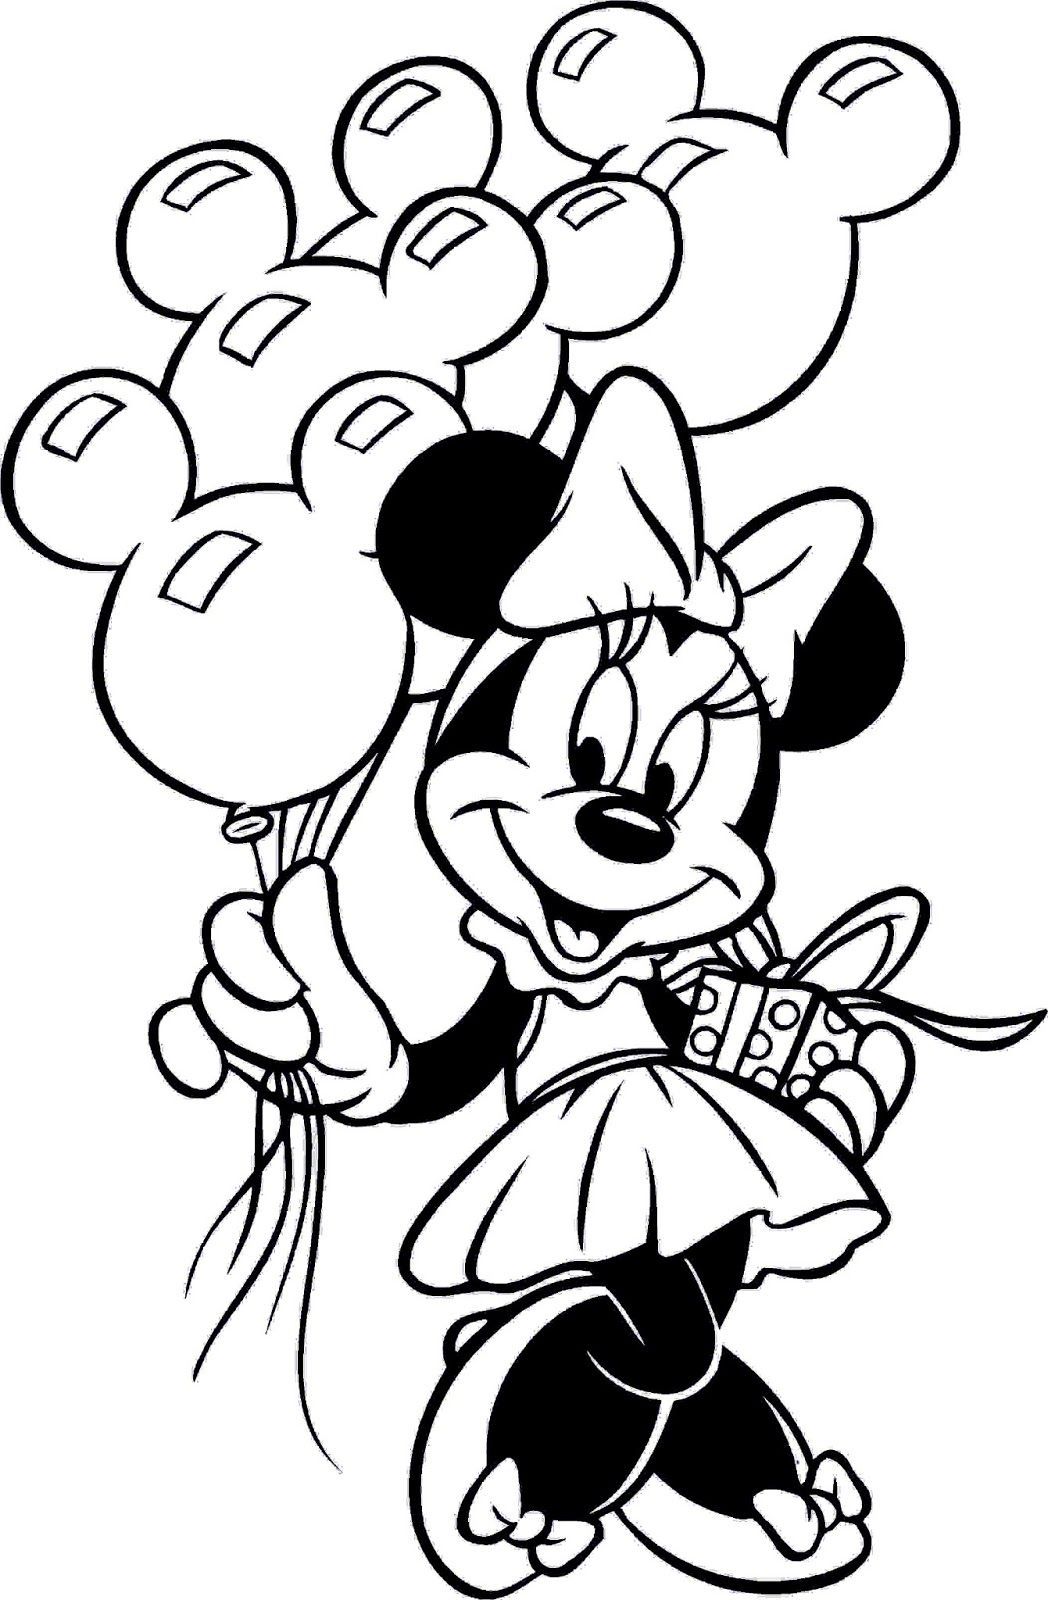 bashful-minnie-mouse-printable-coloring-pages